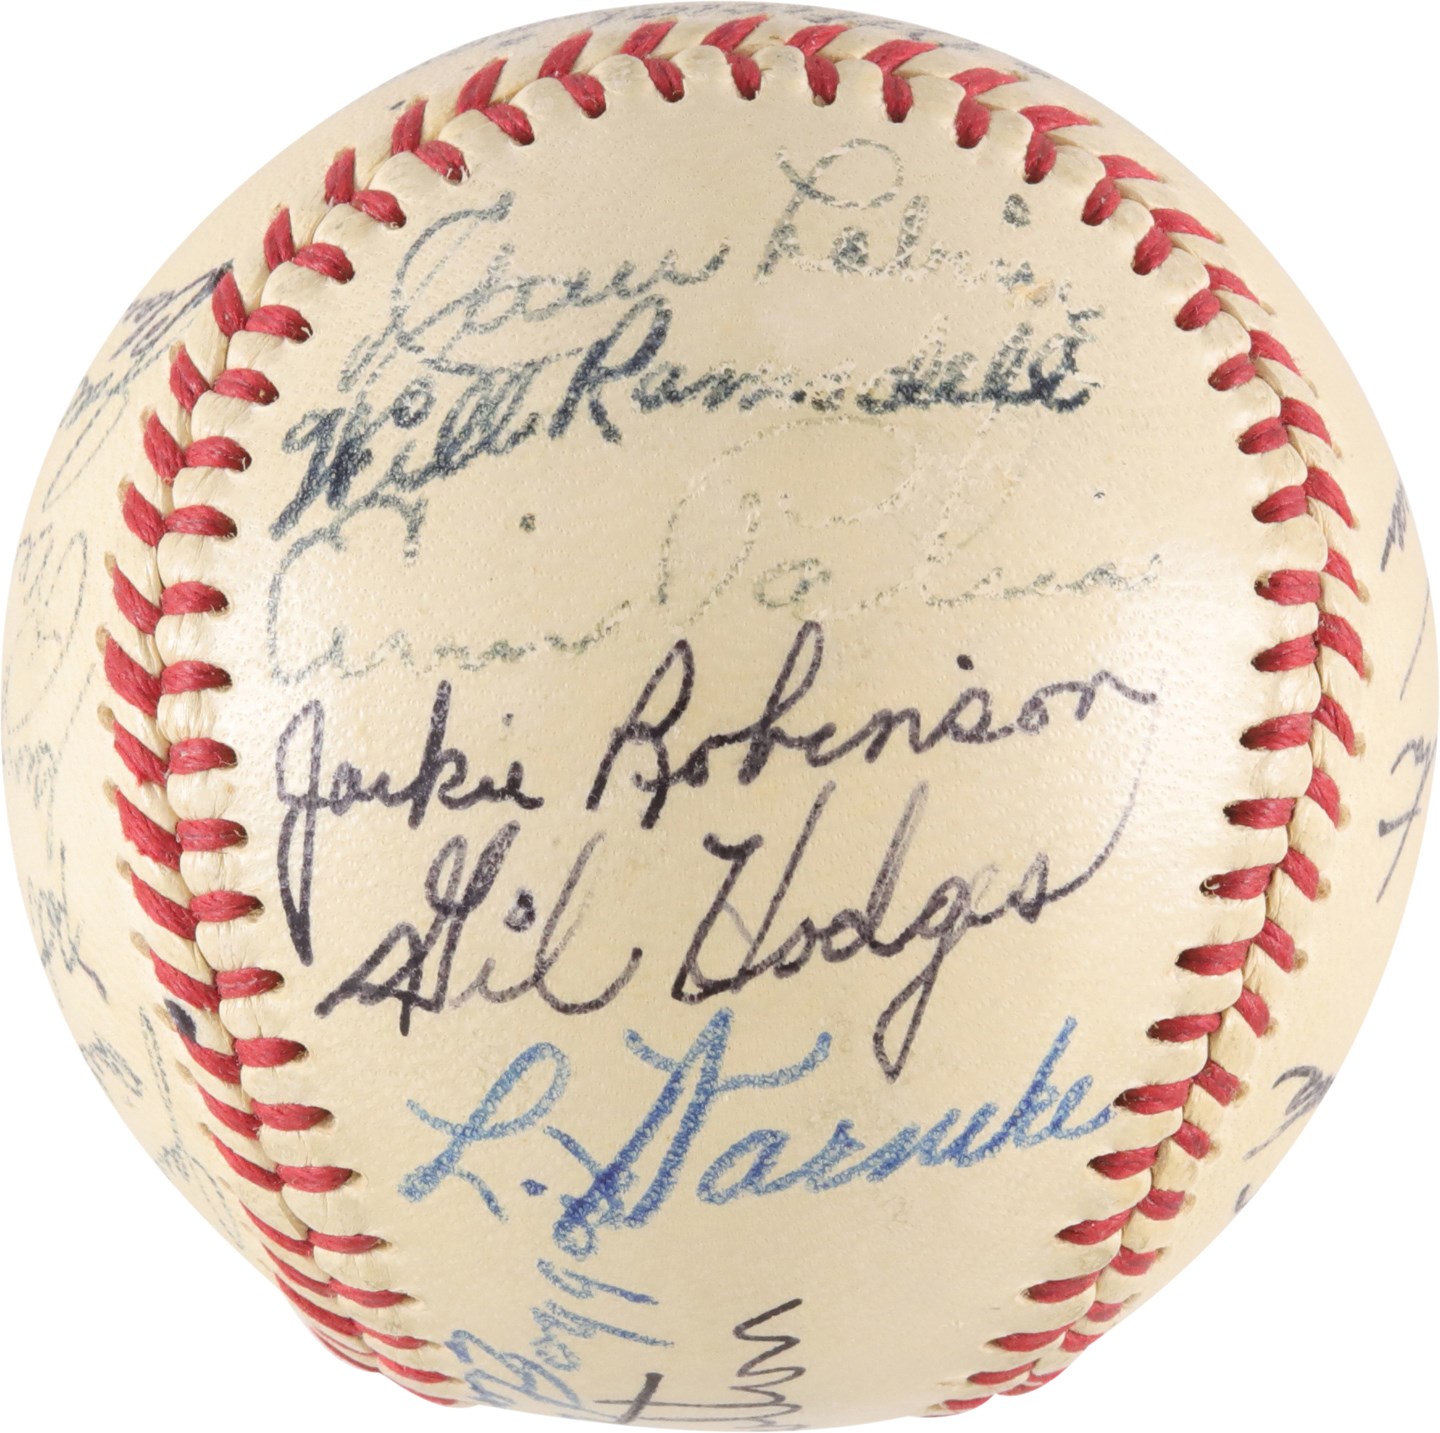 - 1950 Brooklyn Dodgers Team-Signed Ball - Twice Signed by Jackie Robinson (PSA)